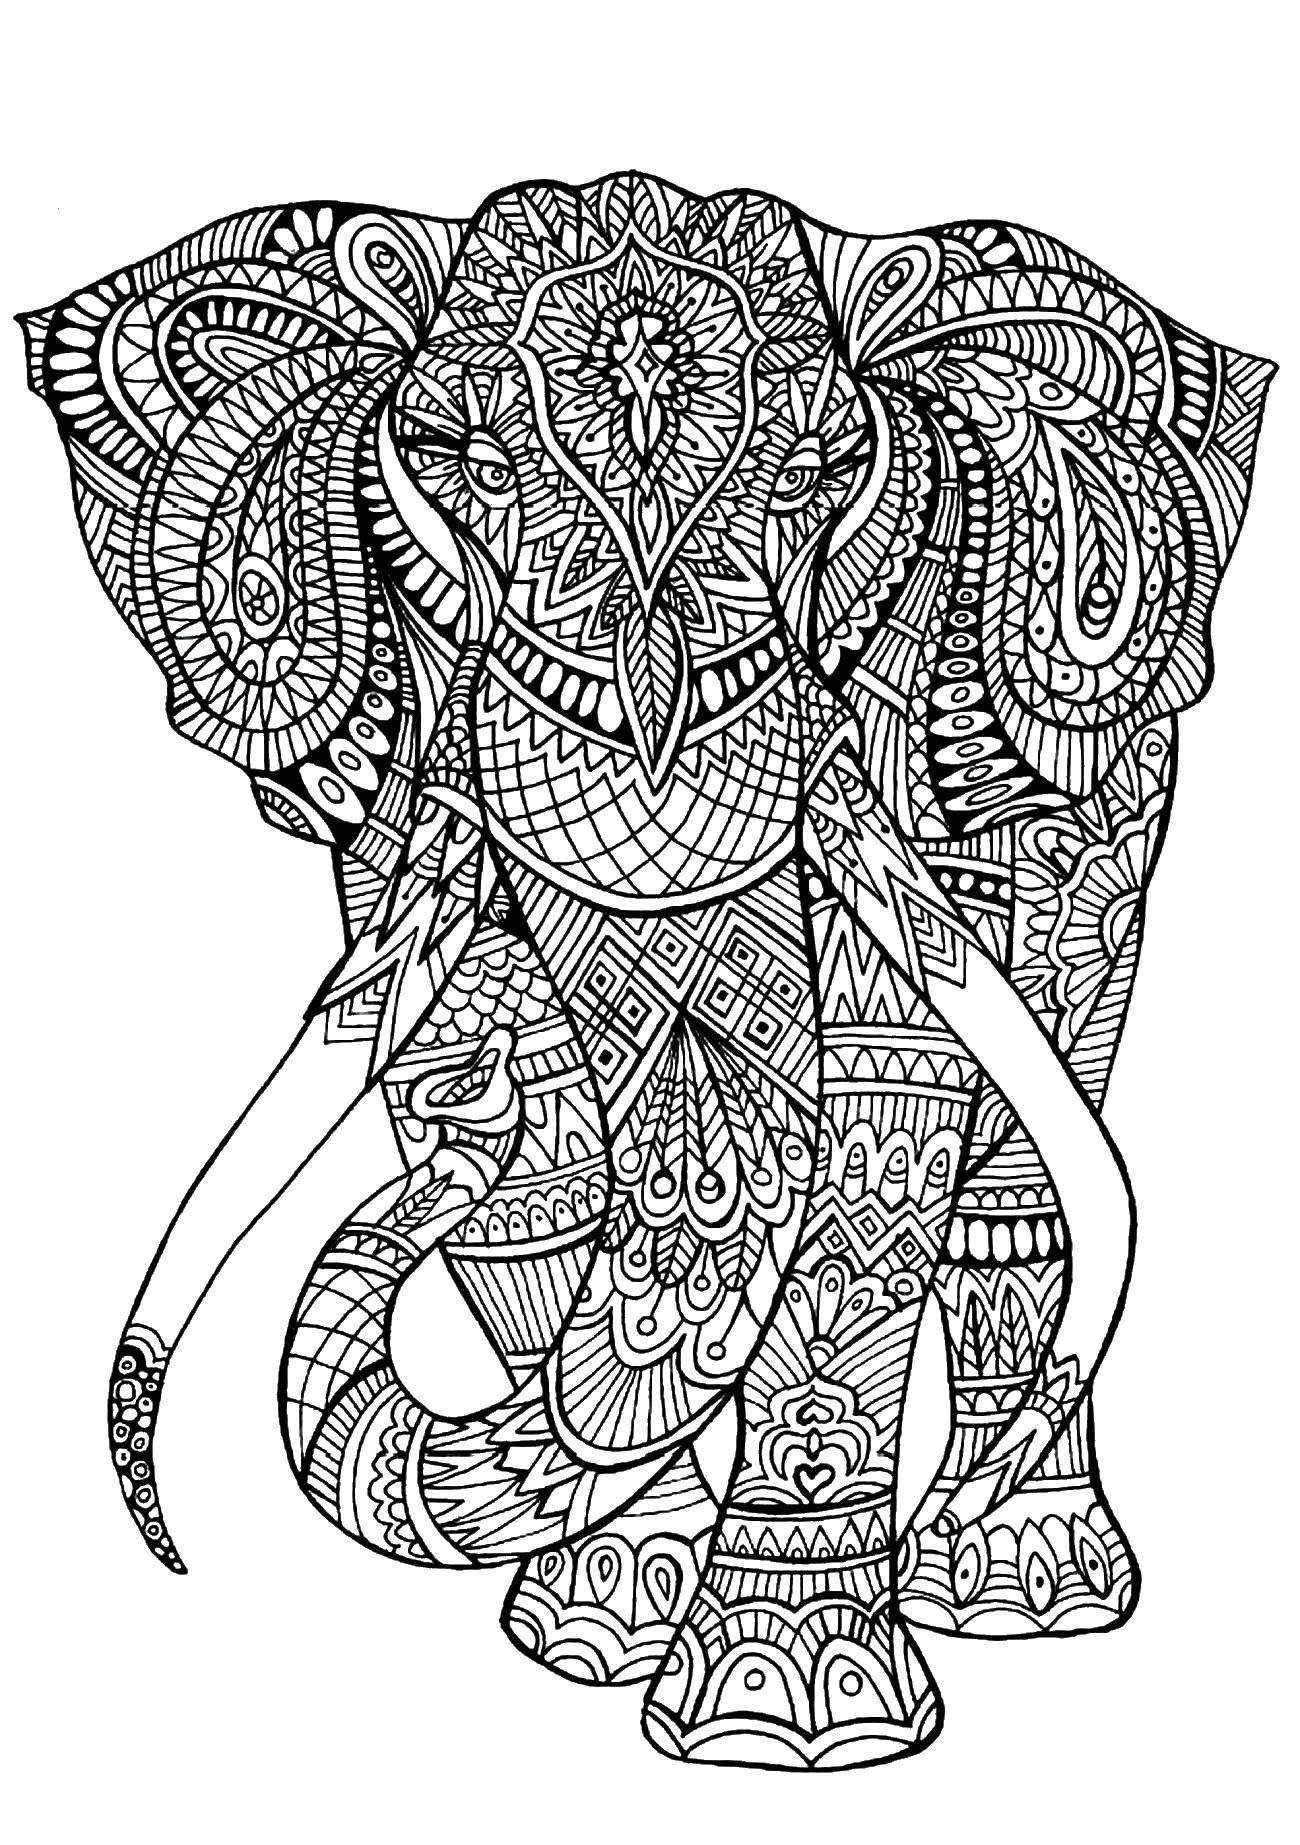 Coloring Patterned elephant. Category patterns. Tags:  patterns, animals, elephants, elephant.